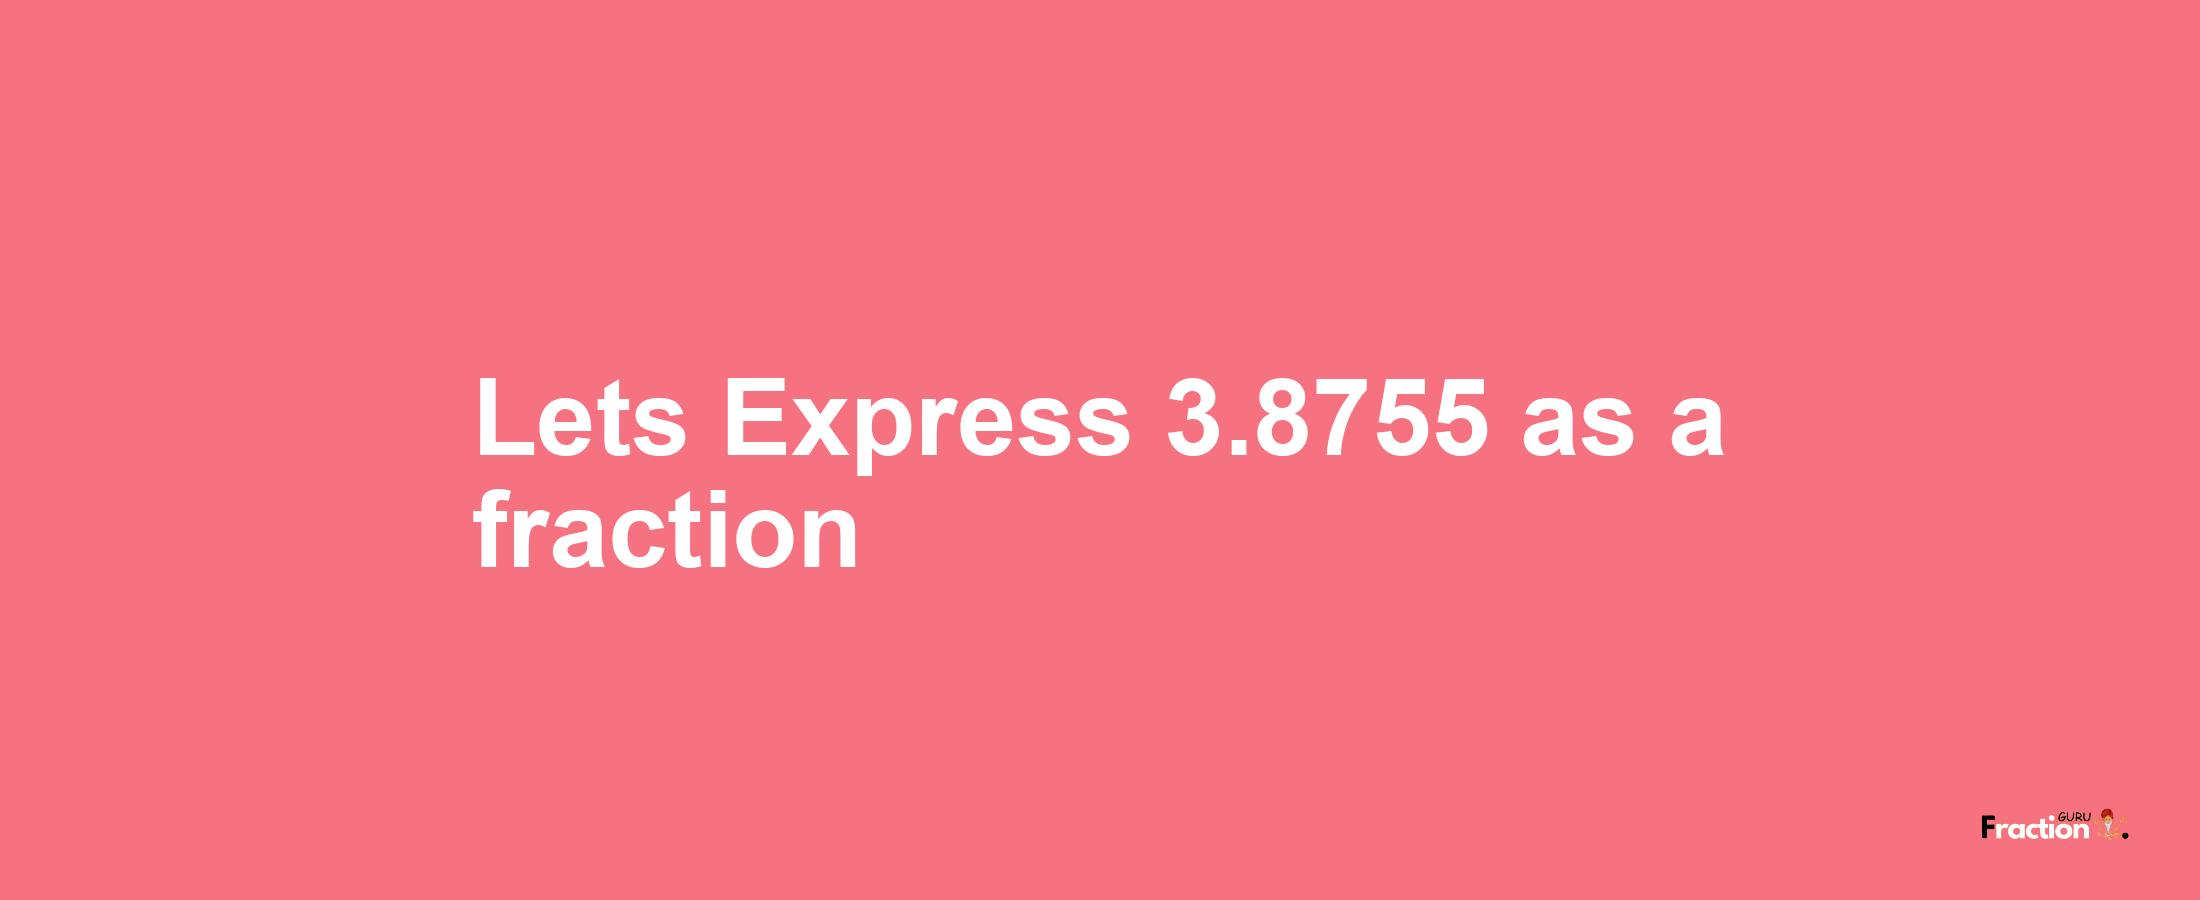 Lets Express 3.8755 as afraction